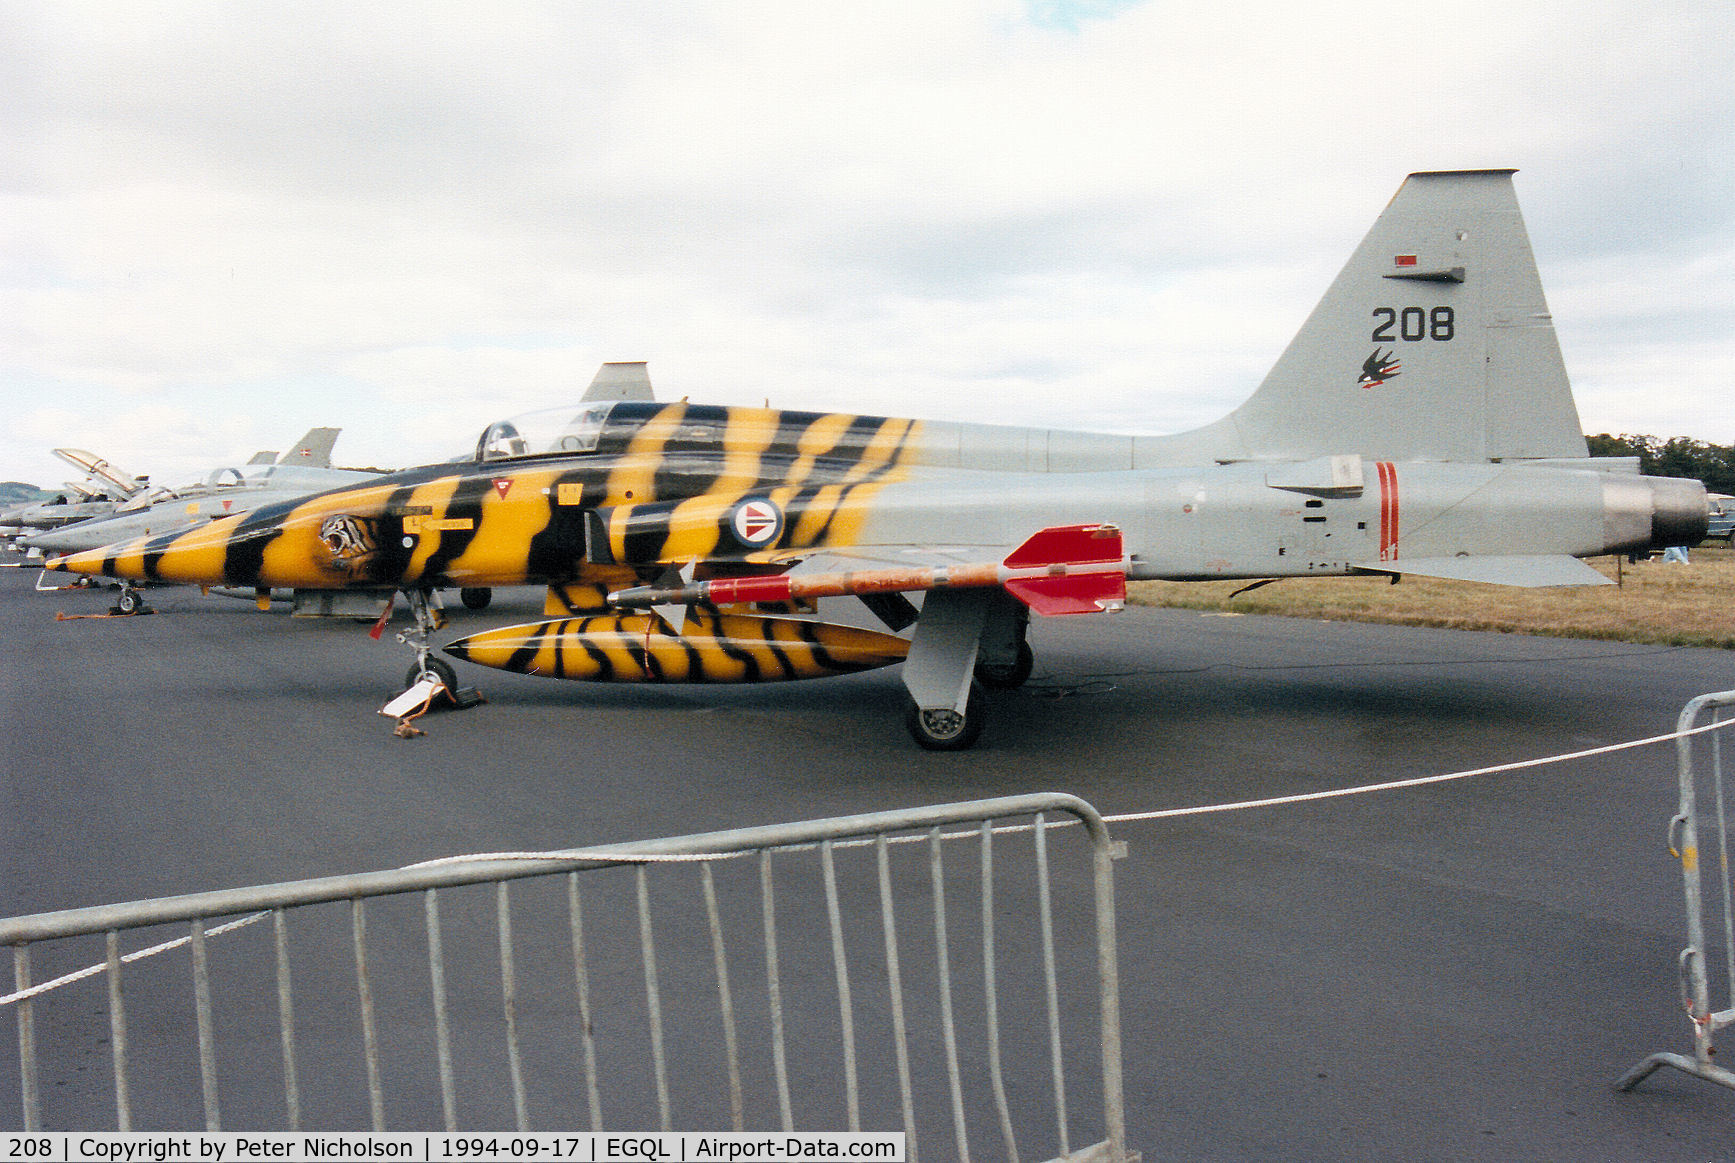 208, 1966 Northrop F-5A Freedom Fighter C/N N.7031, F-5A of 336 Skv Royal Norwegian Air Force on display at the 1994 RAF Leuchars Airshow.